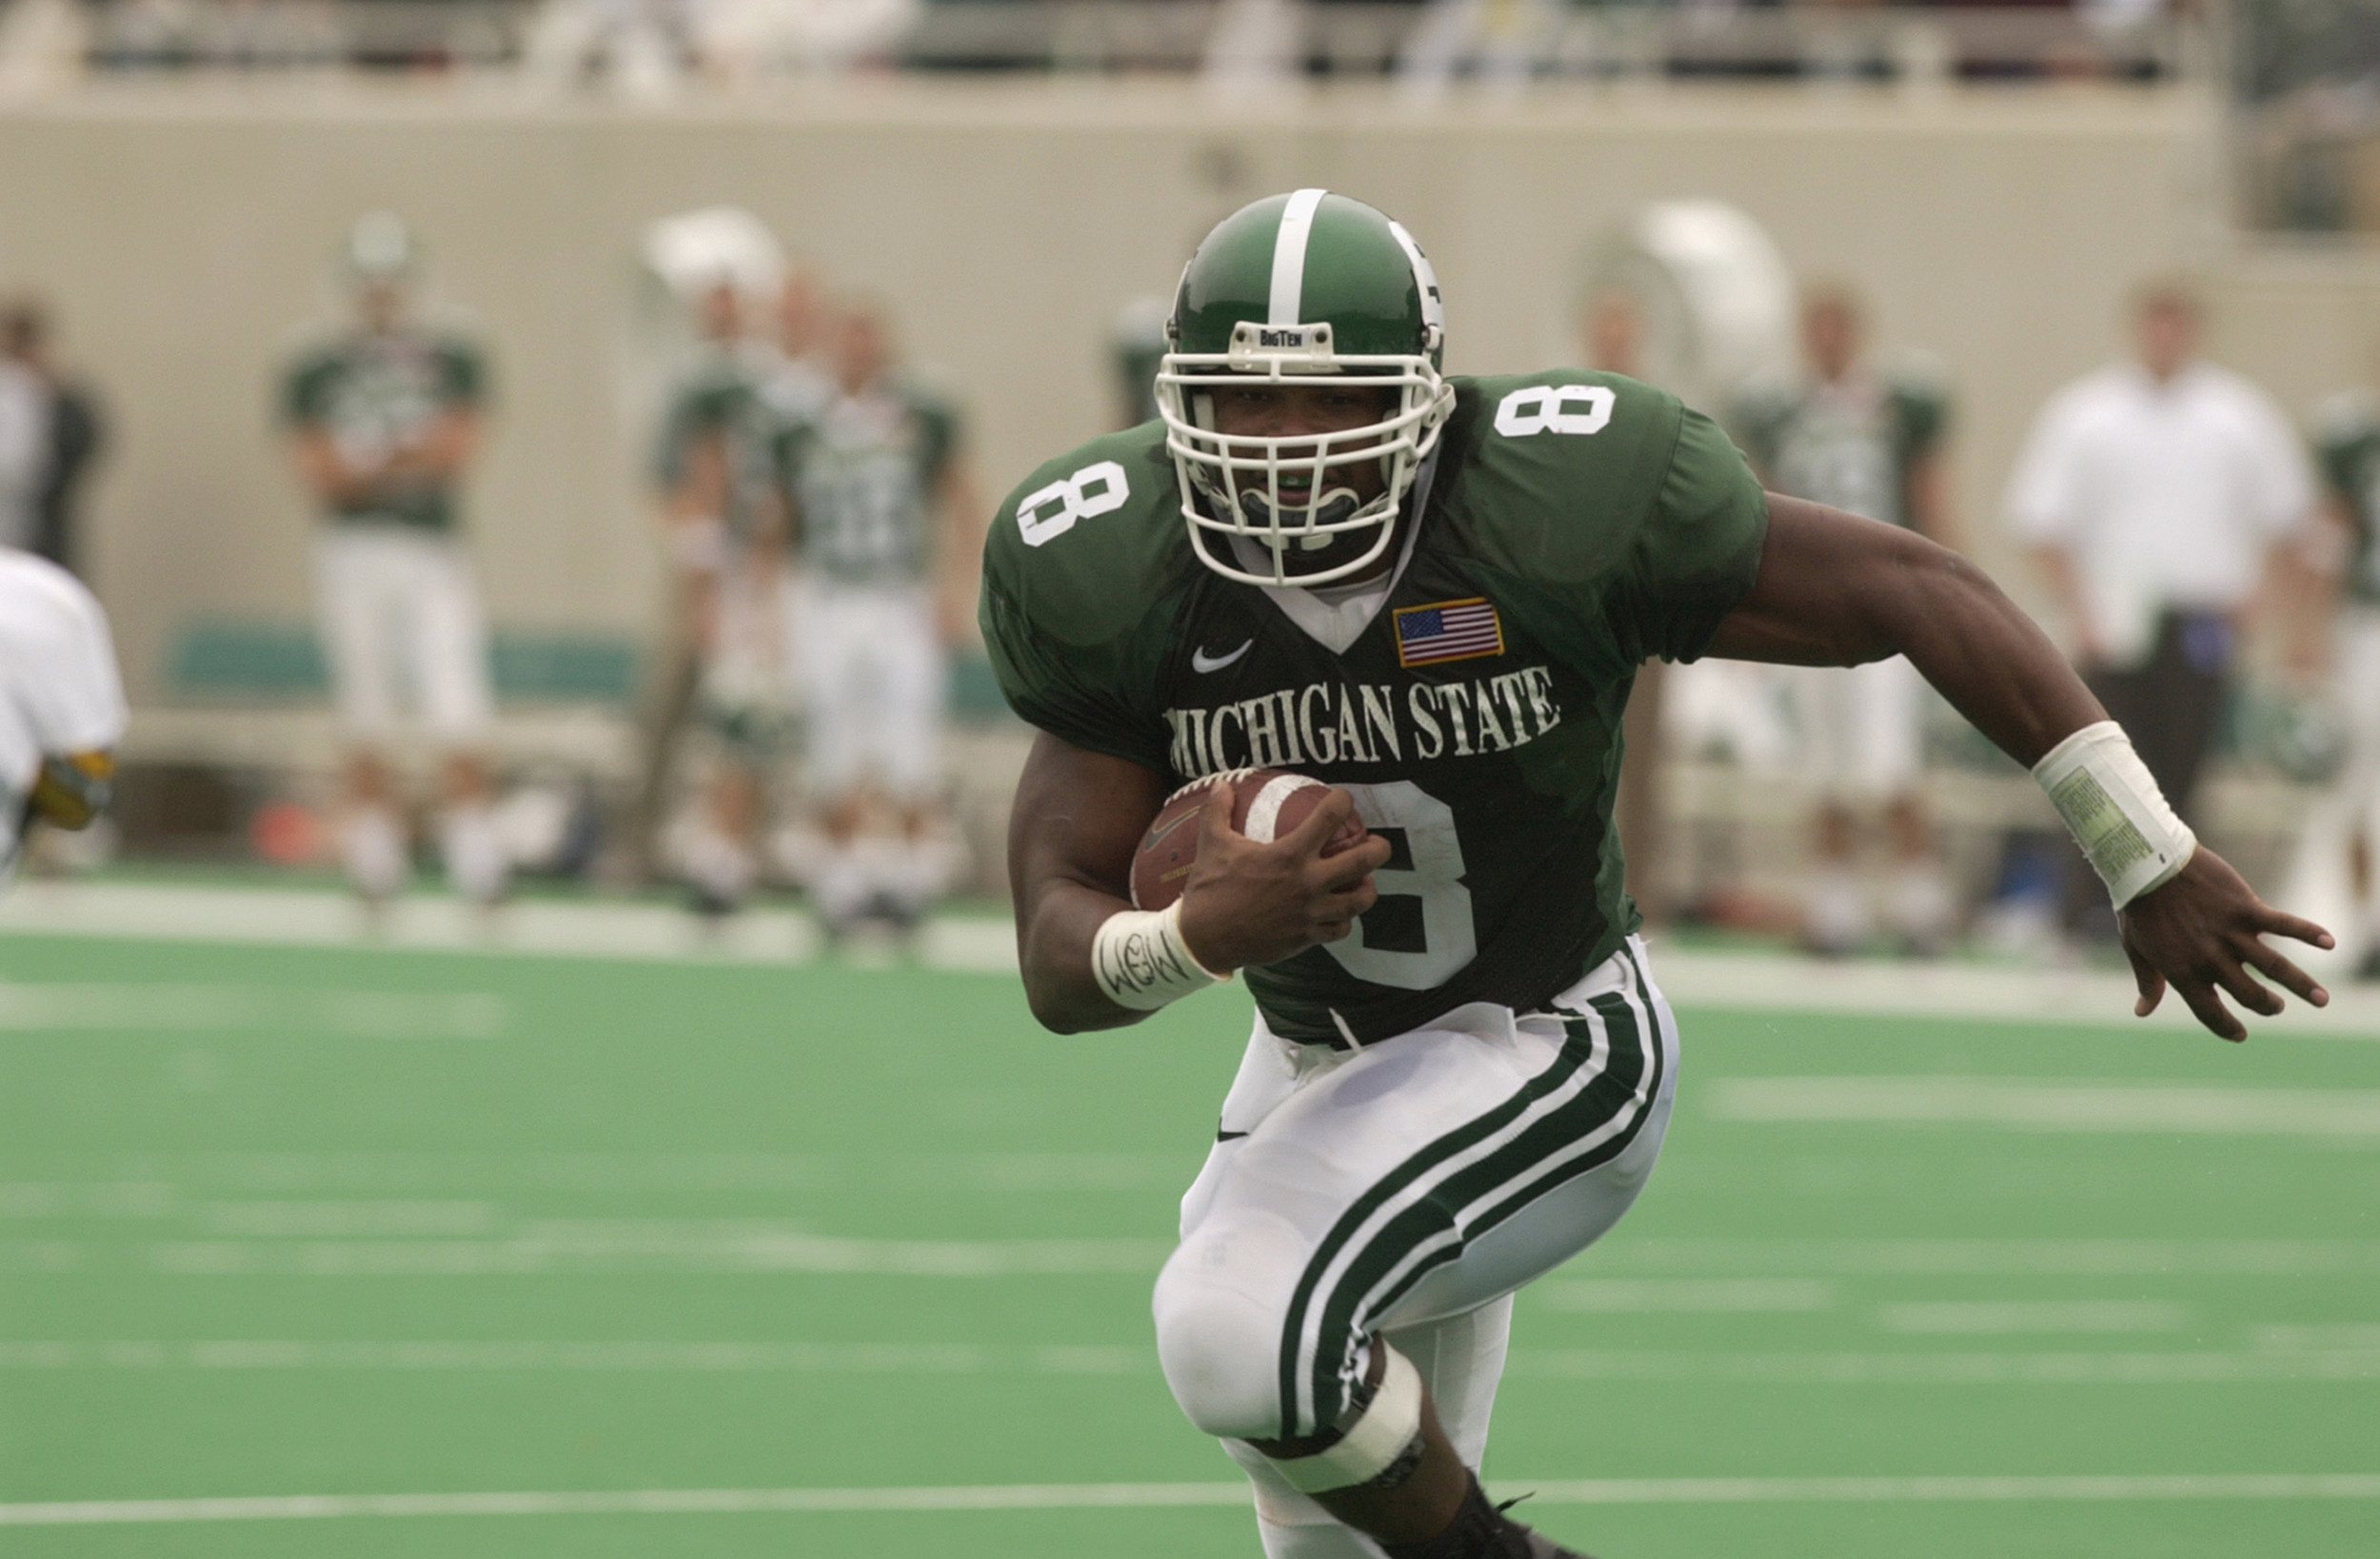 Michigan State's Lorenzo White inducted into College Football Hall